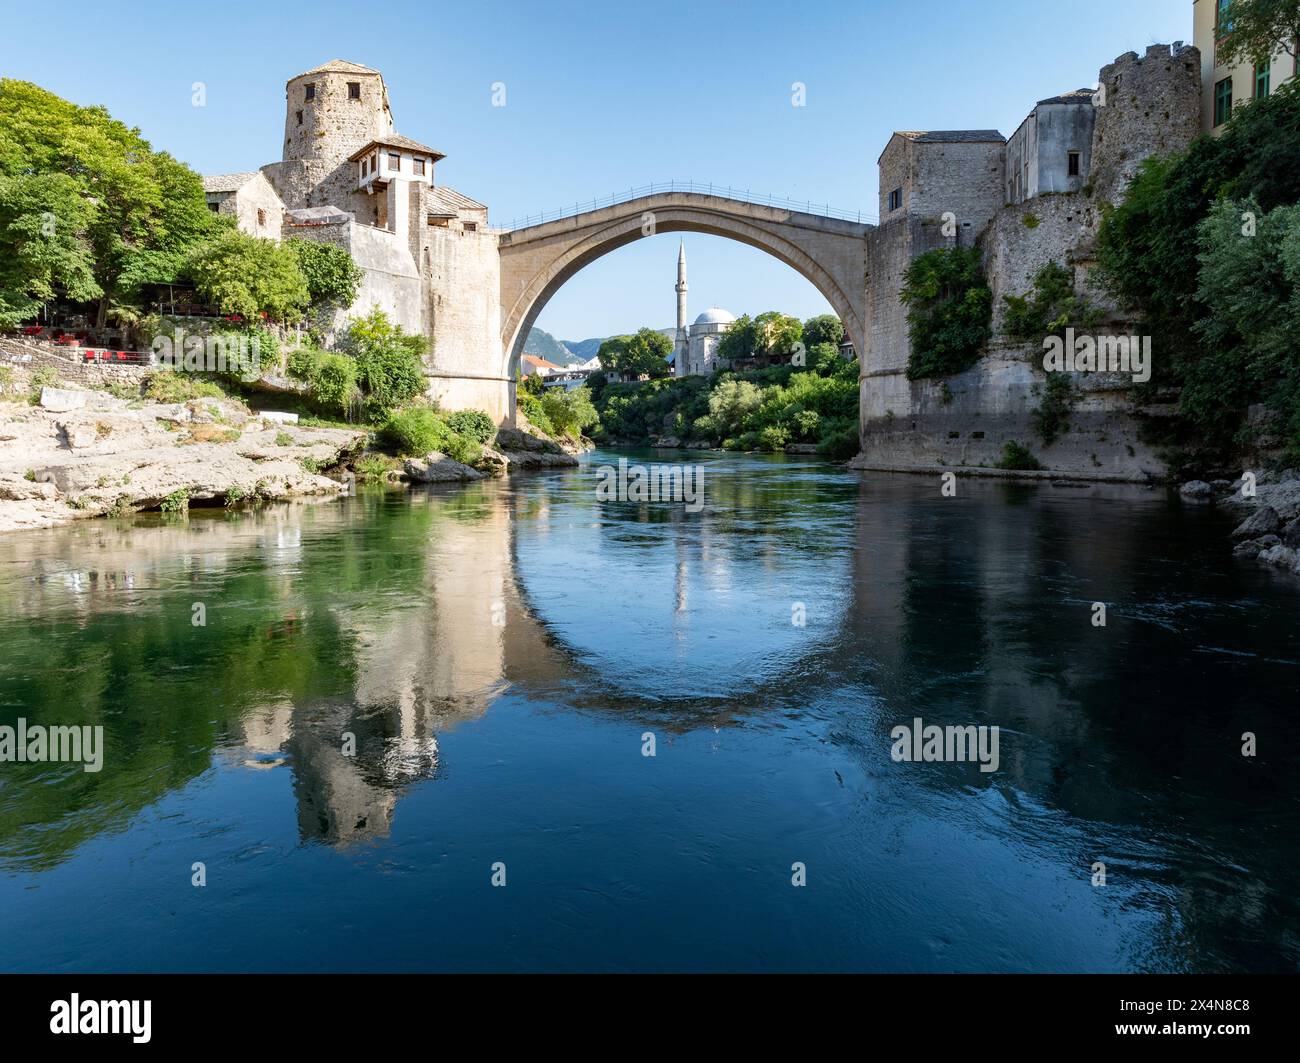 The Old Bridge, Mostar, Bosnia-Herzegovina. The reconstructed Old Bridge spanning the deep valley of the Neretva River. Stock Photo